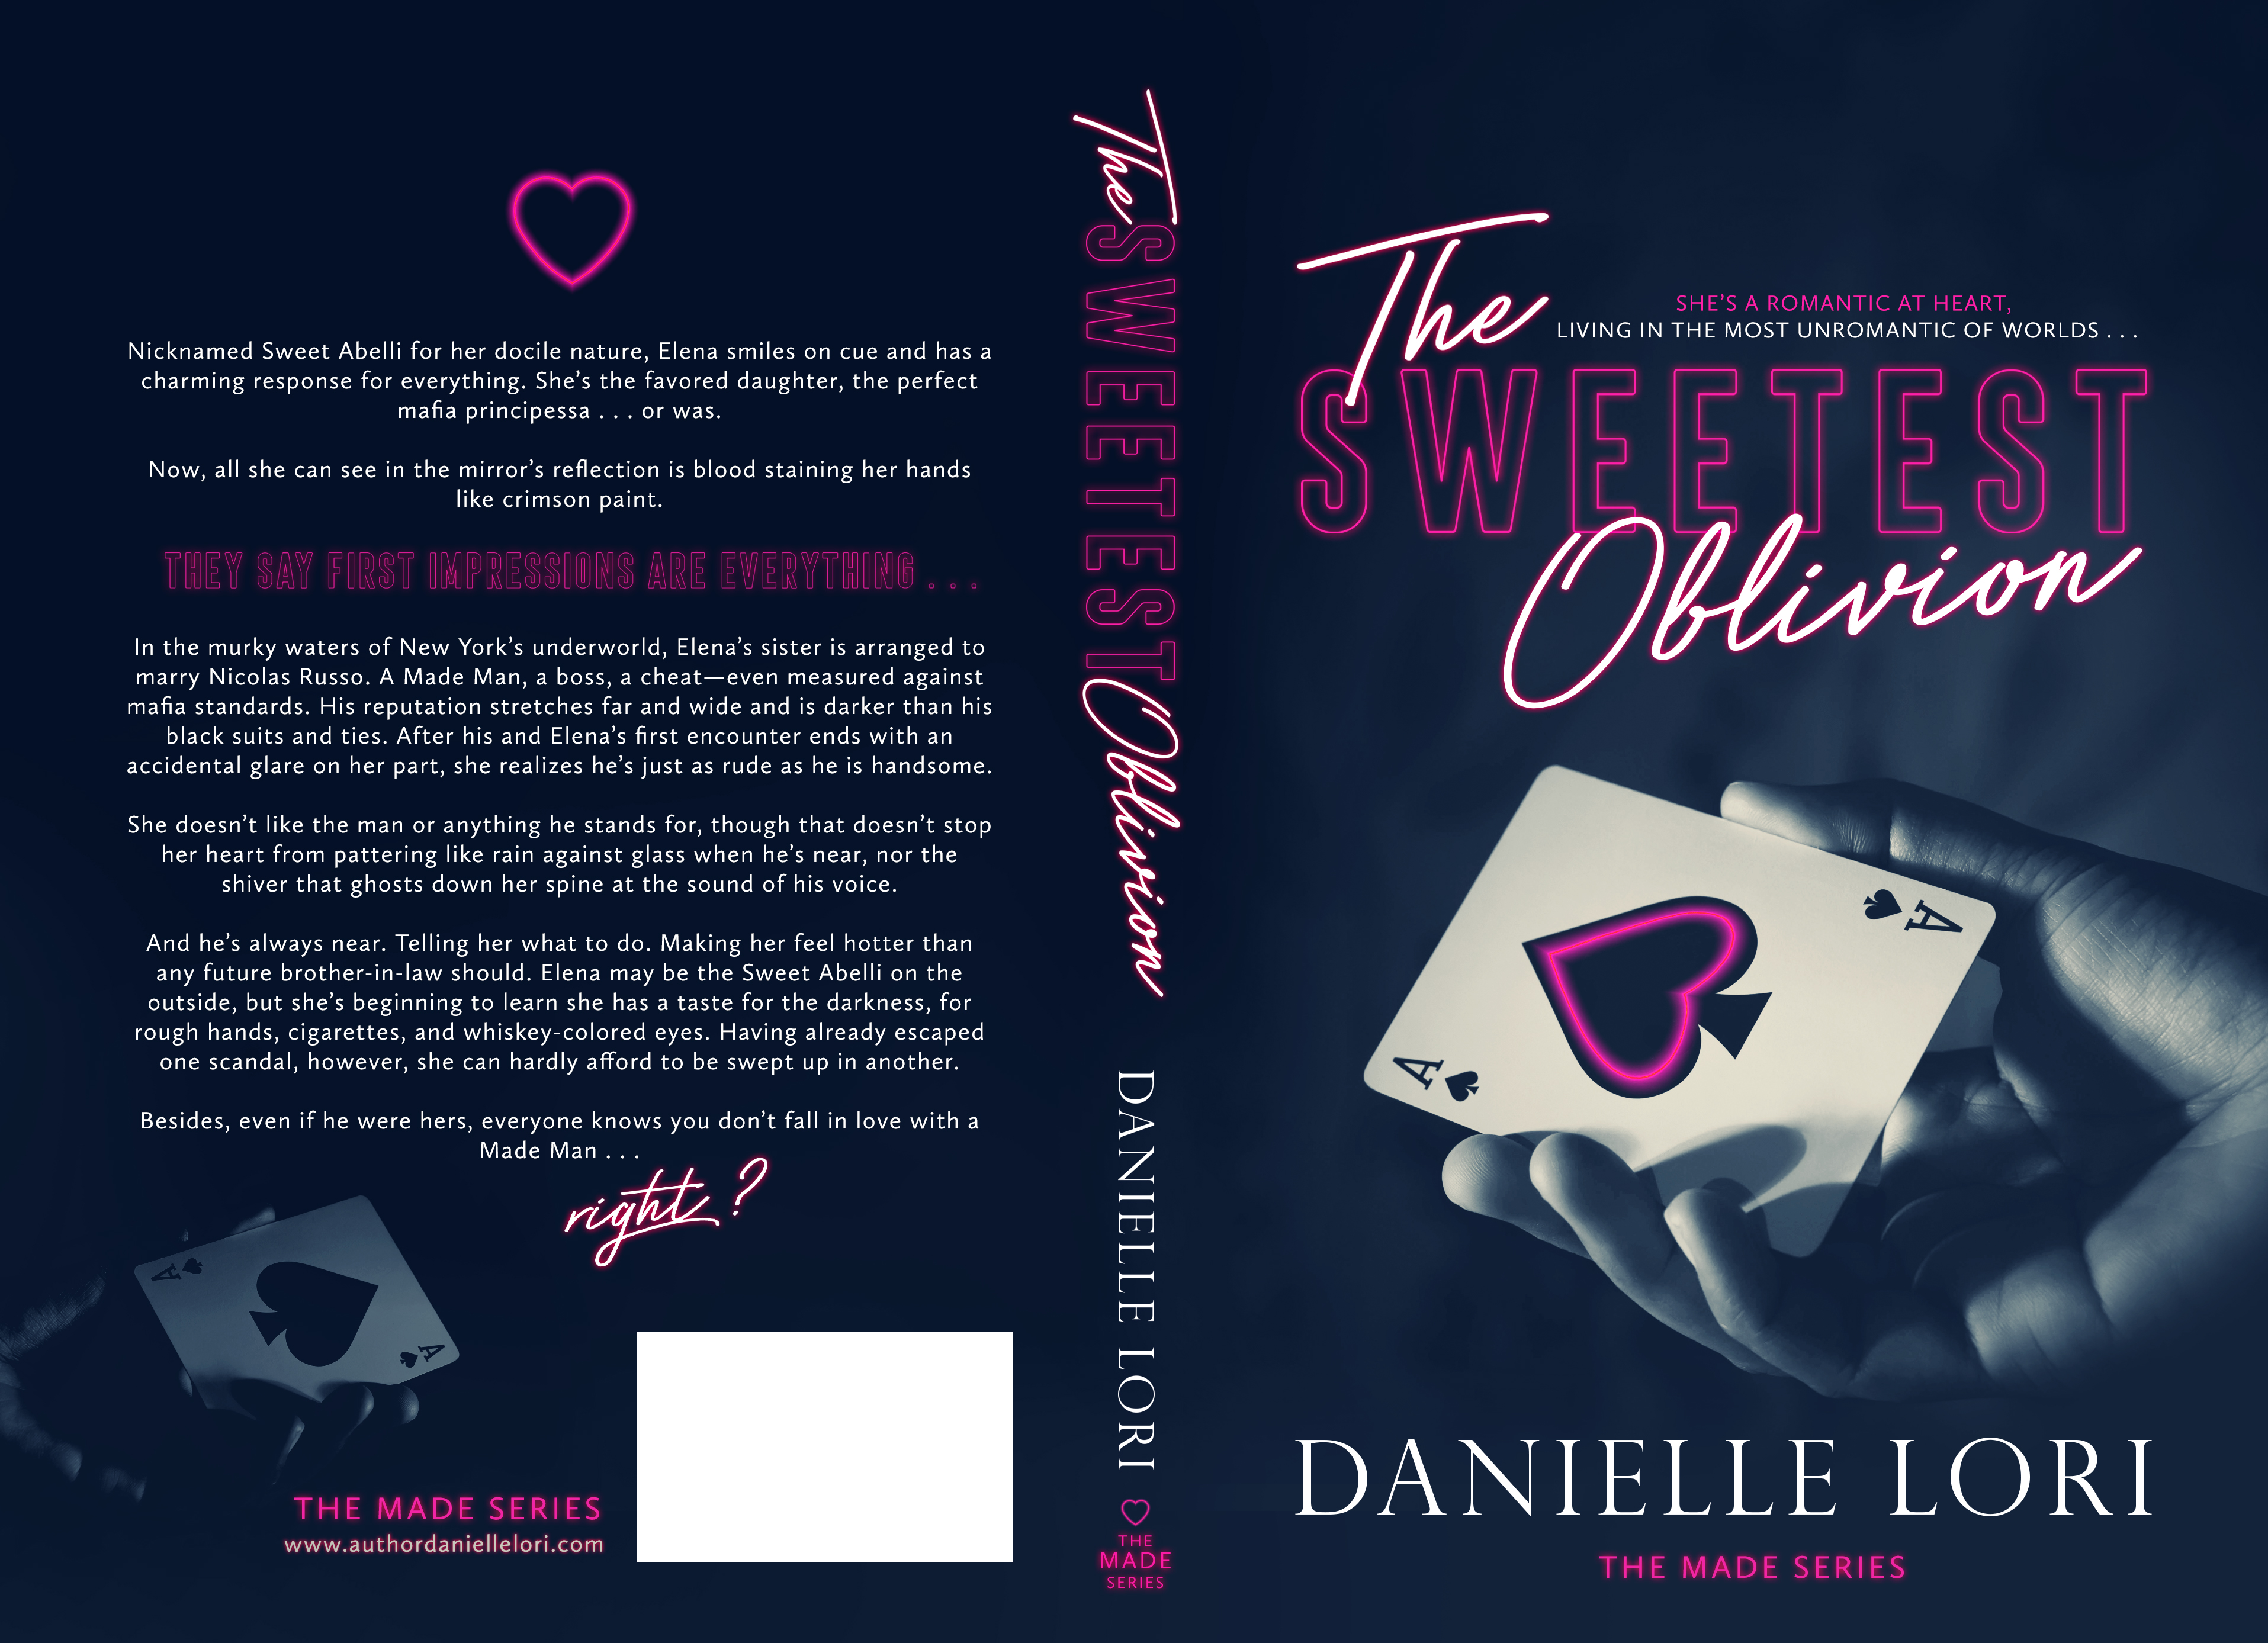 Sweet Oblivious Cover